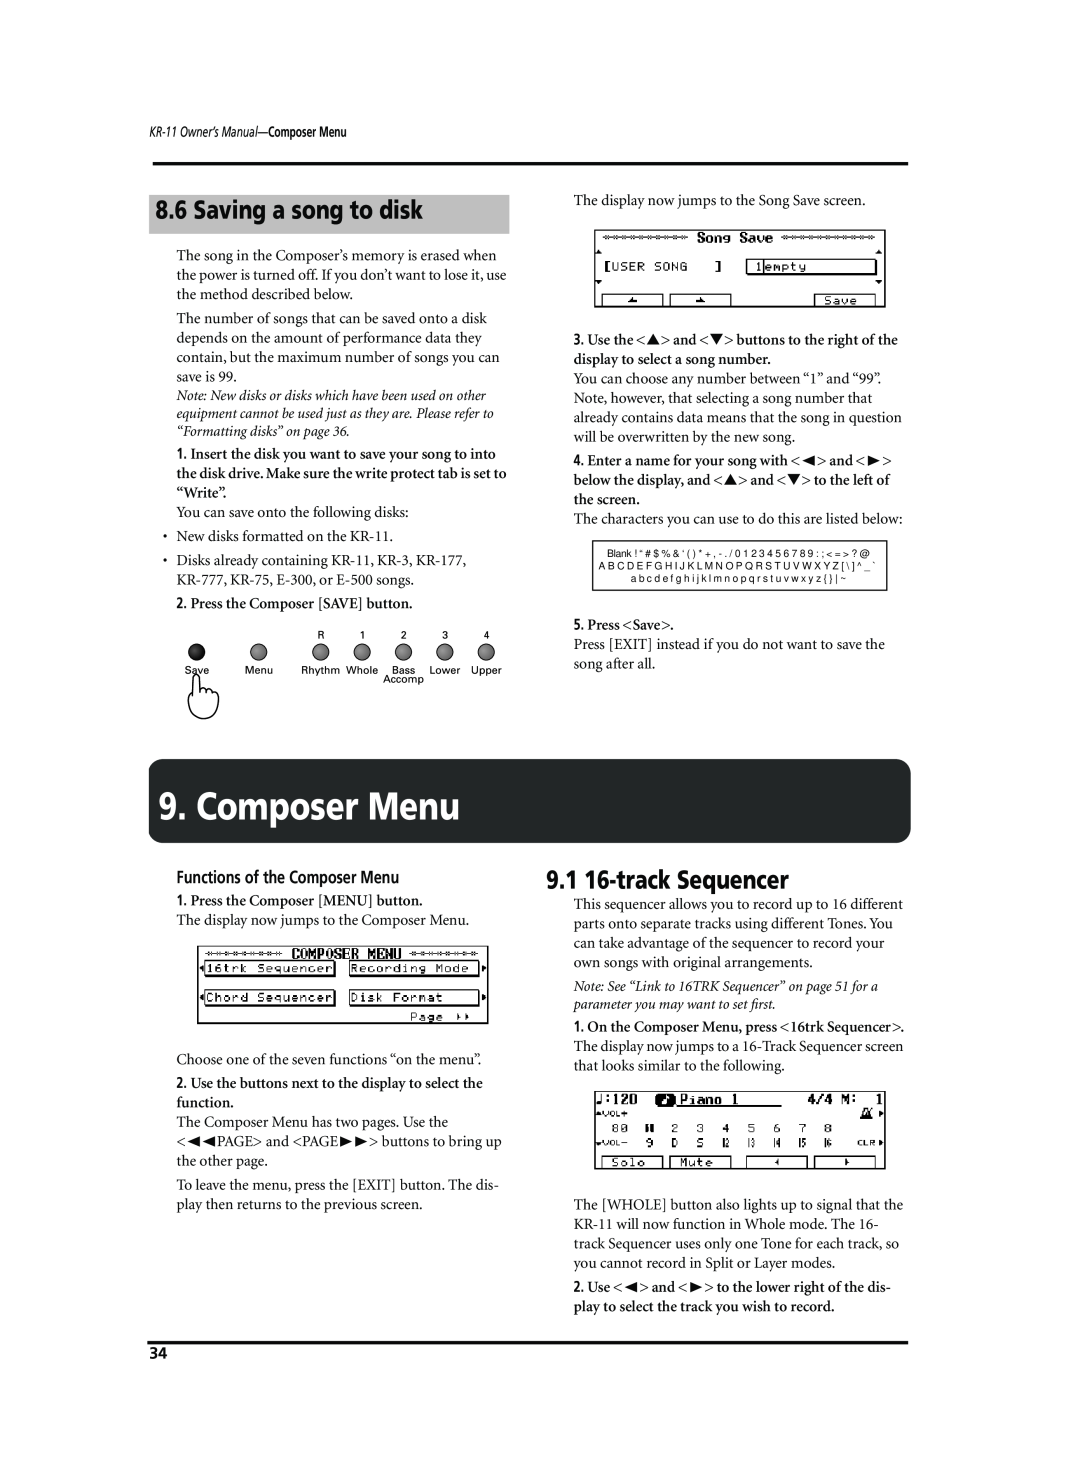 Roland KR-11 owner manual Saving a song to disk, 9.1 16-track Sequencer, Functions of the Composer Menu 